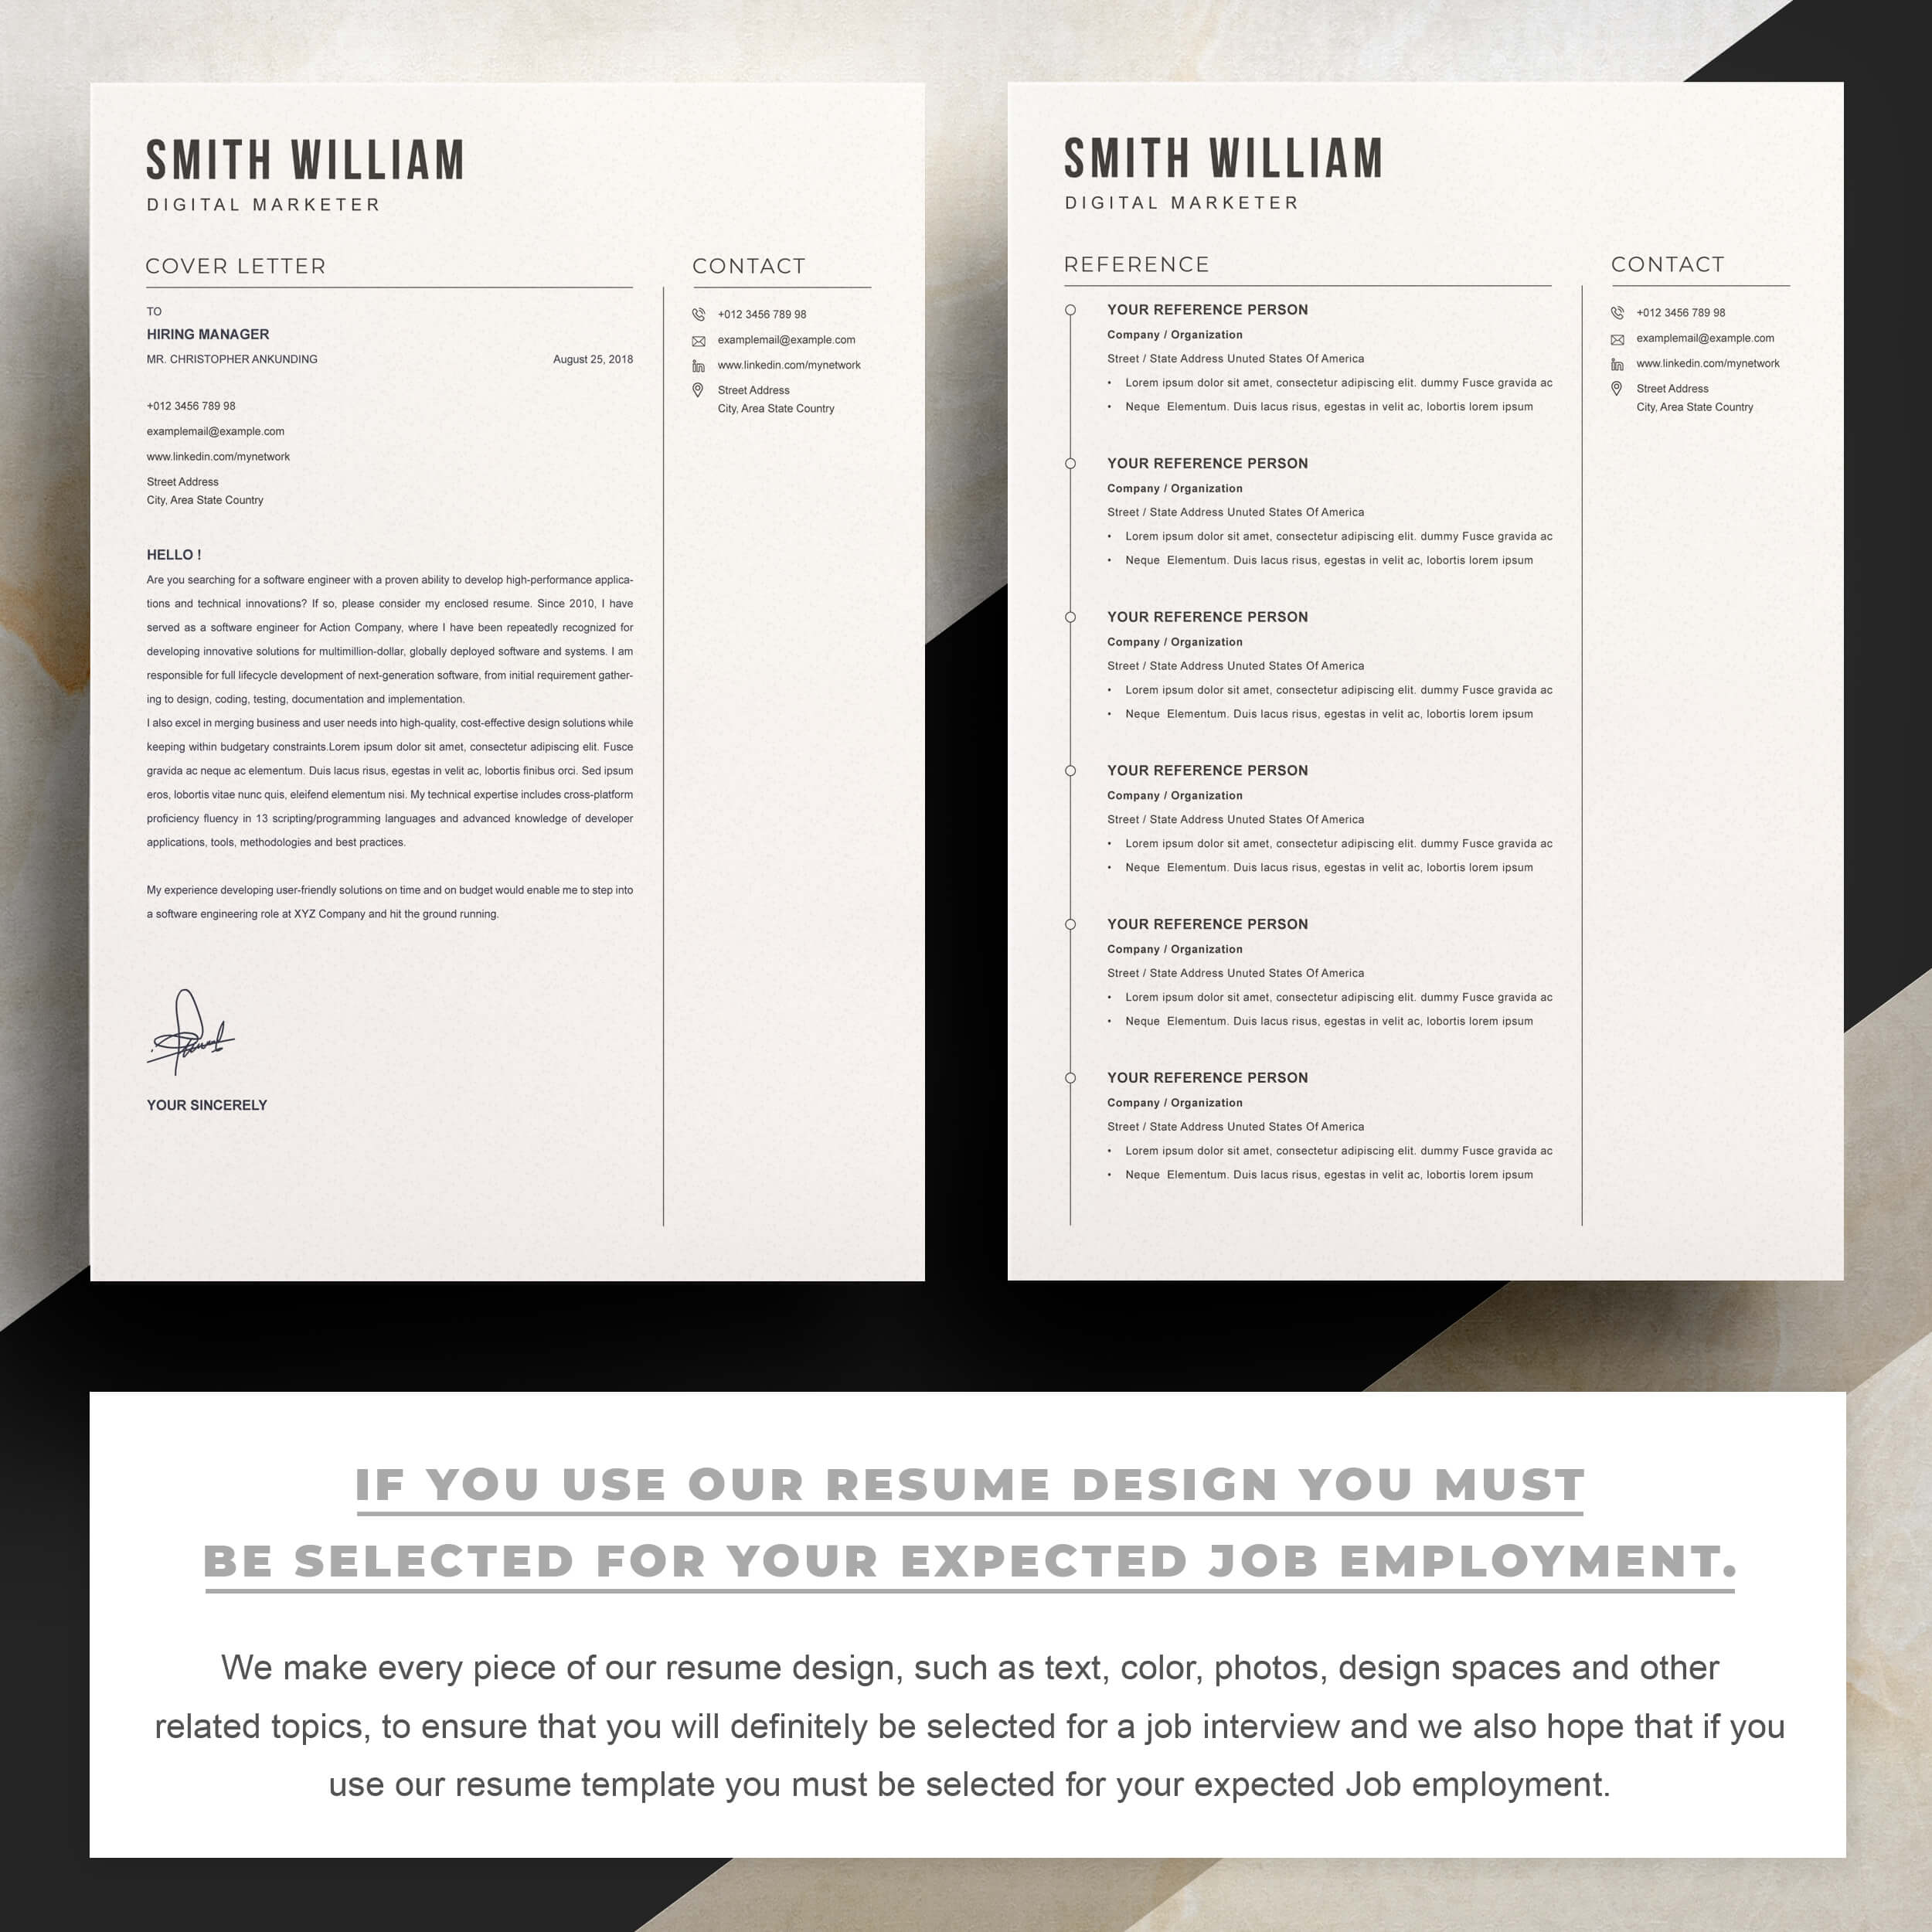 03 2 pages free resume design template 1 937